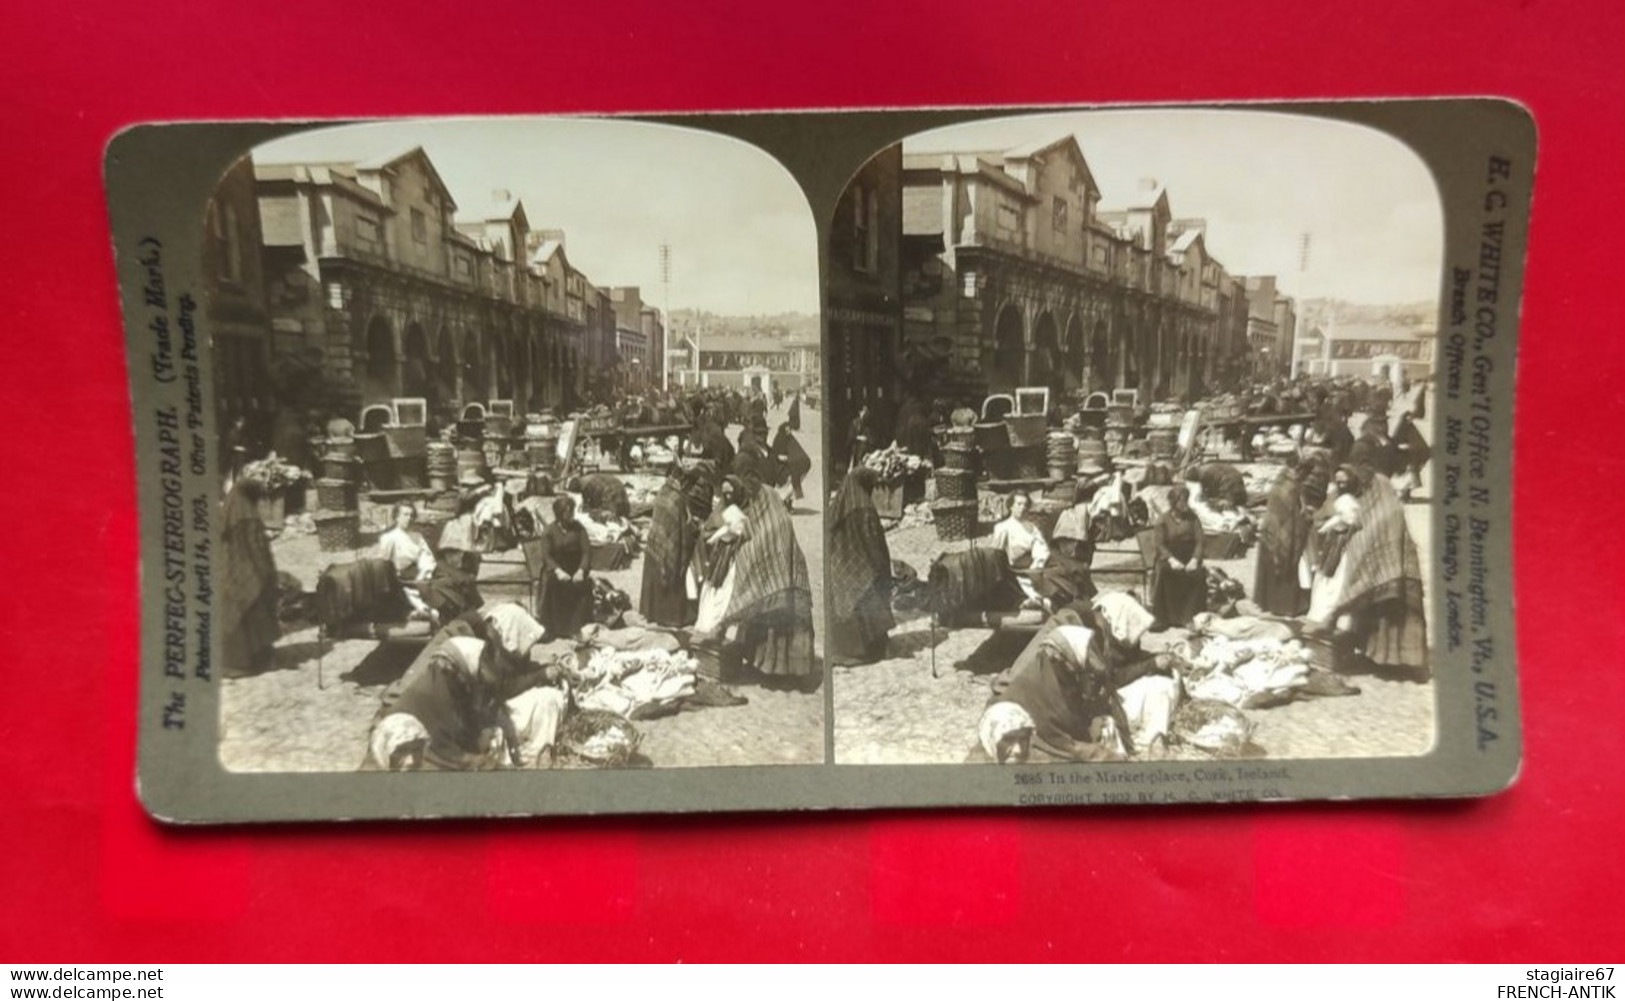 PHOTO STÉRÉO H.C. WHITE CO USA IN THE MARKETPLACE CORK IRELAND - Stereo-Photographie